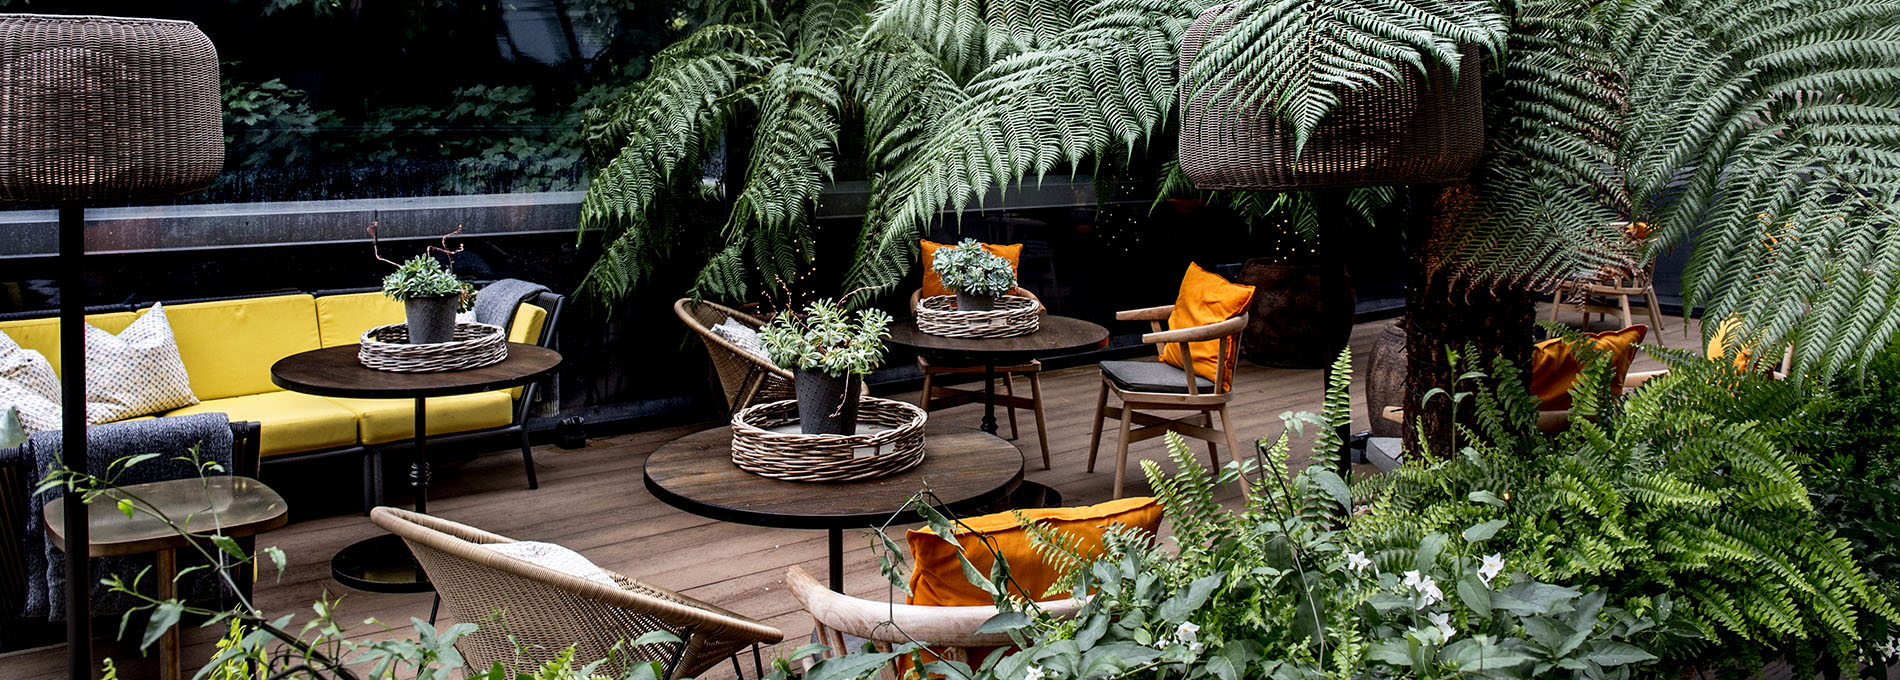 Outdoor terrace with seating and greenery